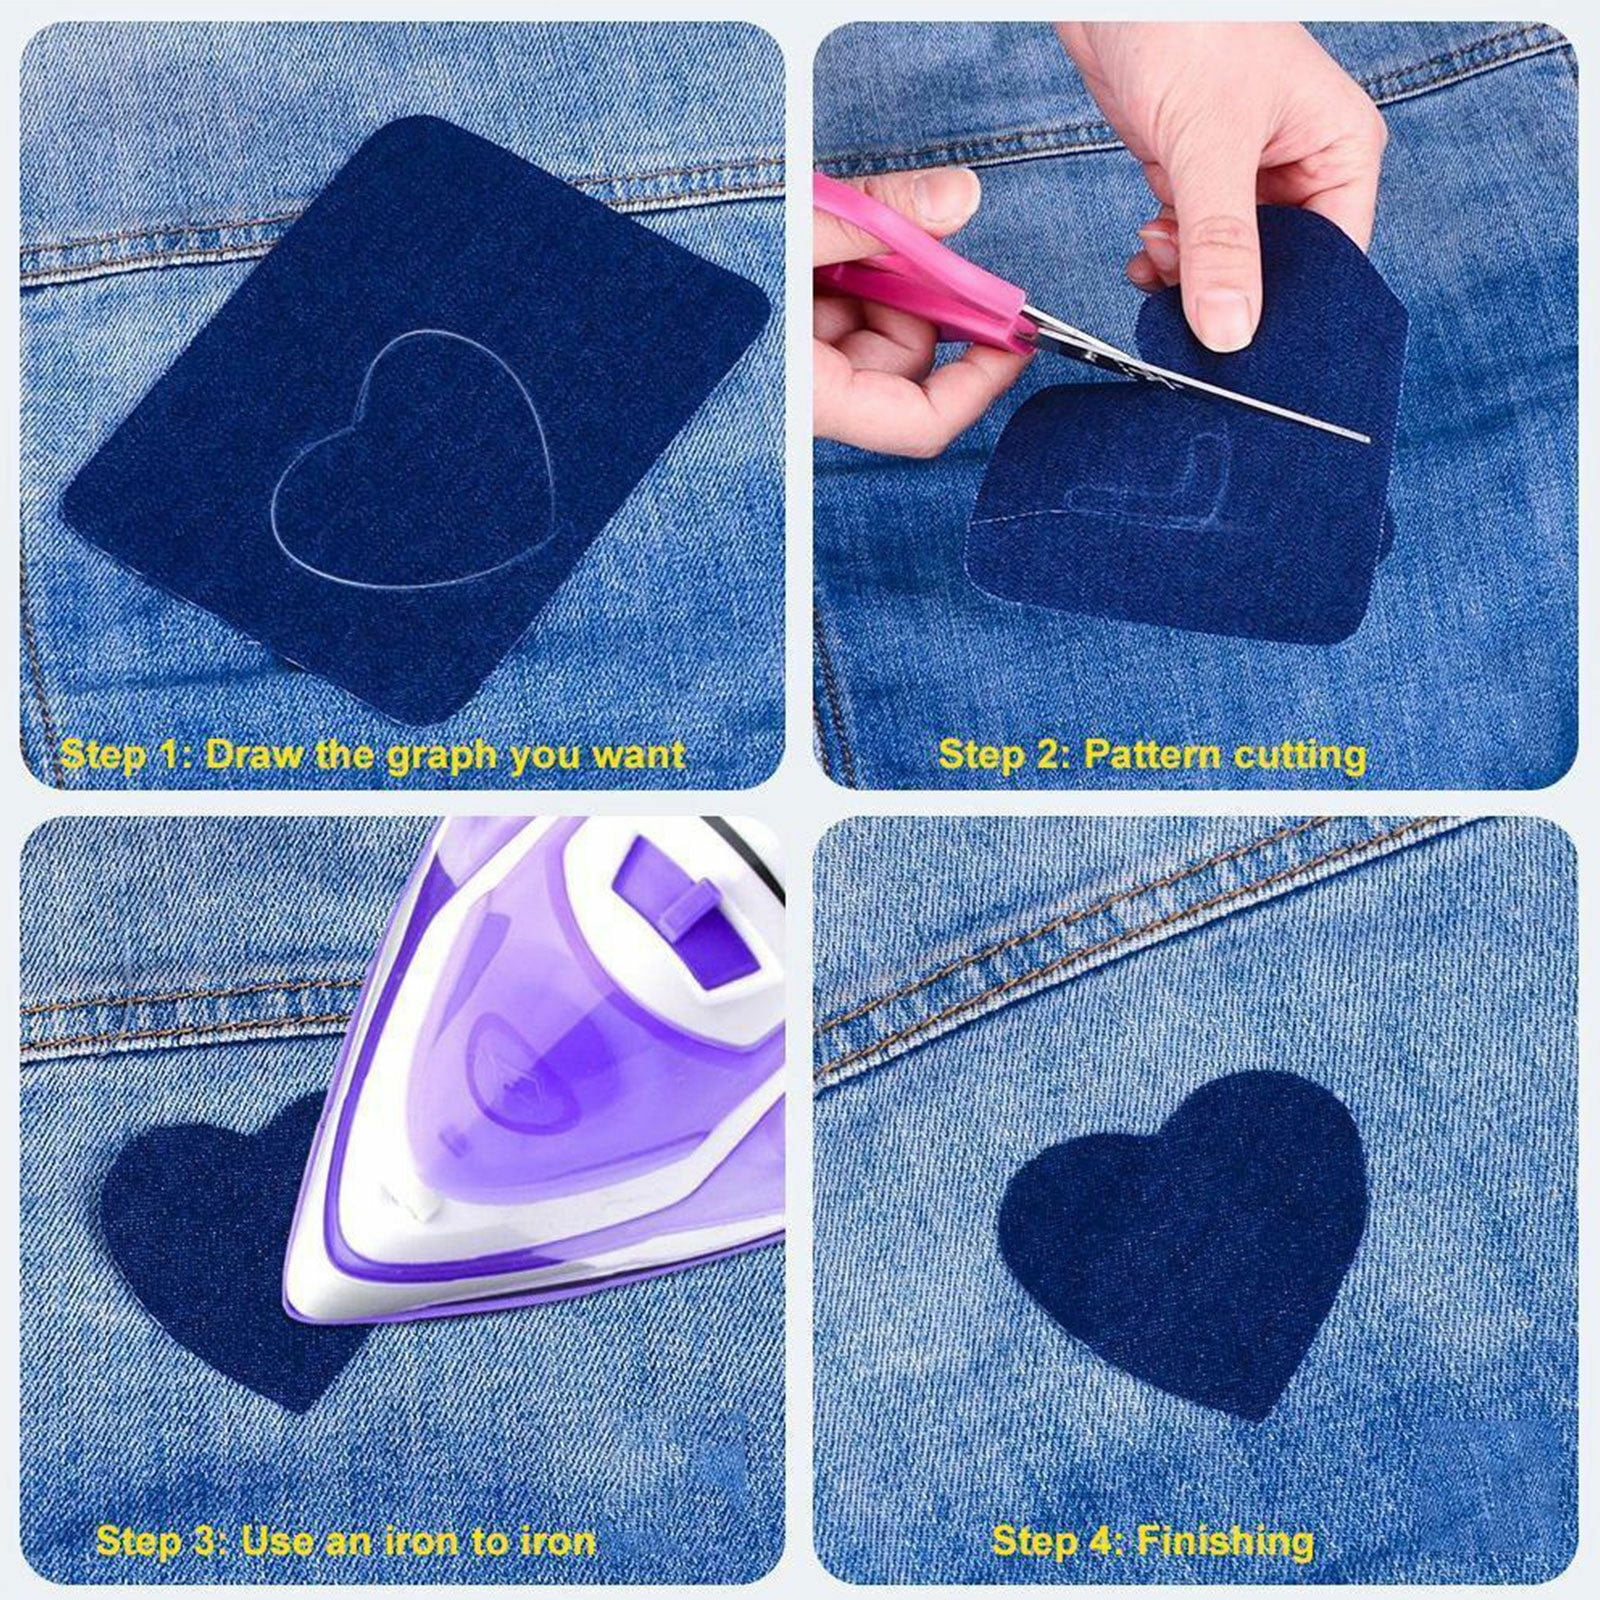 Outuxed 24pcs Iron on Patches for Clothing Repair Fabric Patches Pants  Jeans, Iron on Repair Kit for Elbow Knee, 4 Dark Colors, Large and Small  Sizes - Buy Online - 68810988